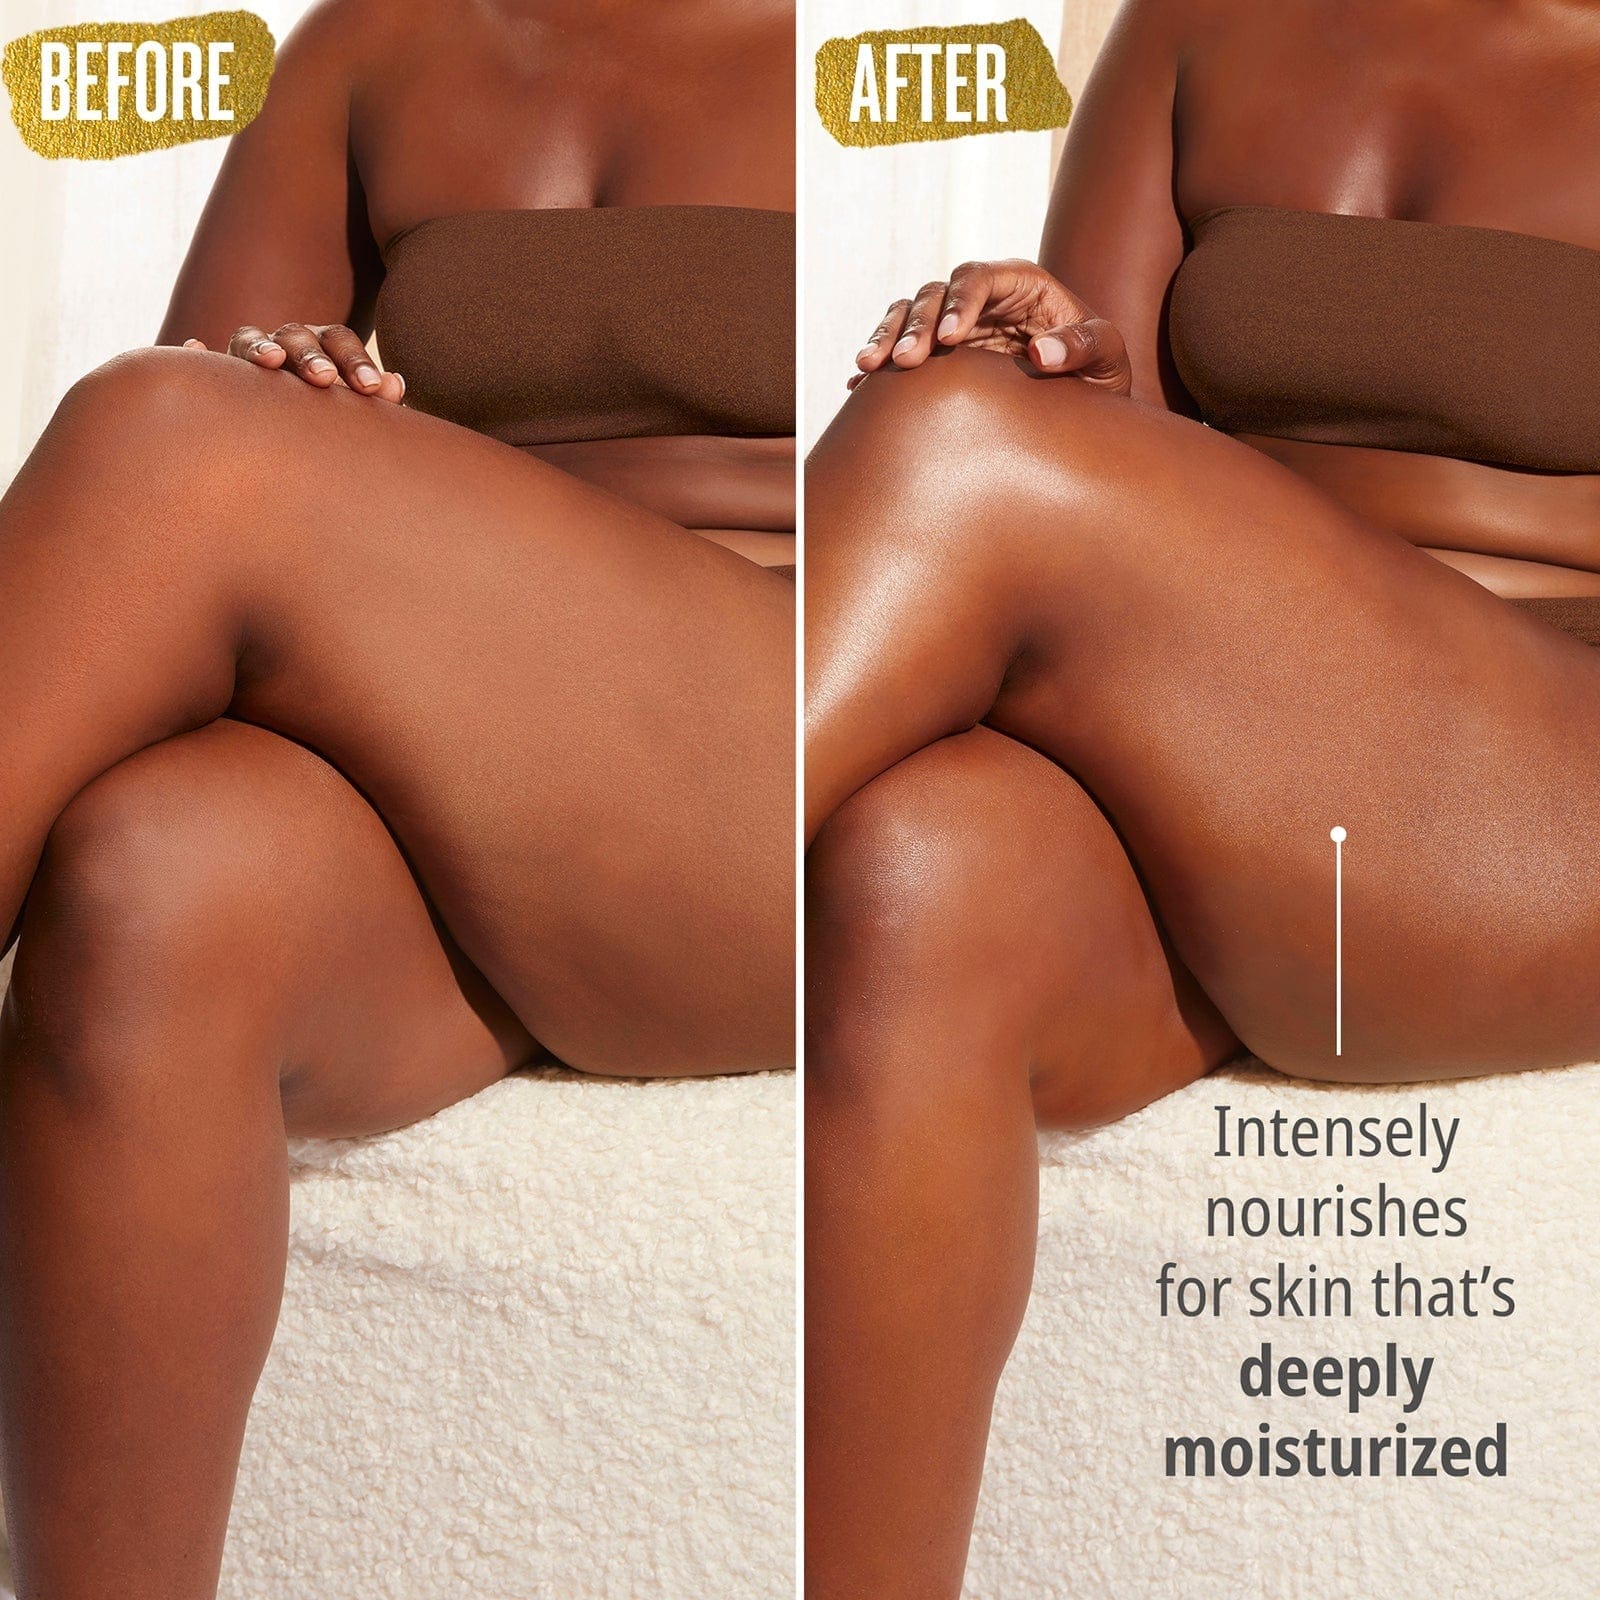 Before // After - Intensely nourishes for skin thats deeply moisturized.